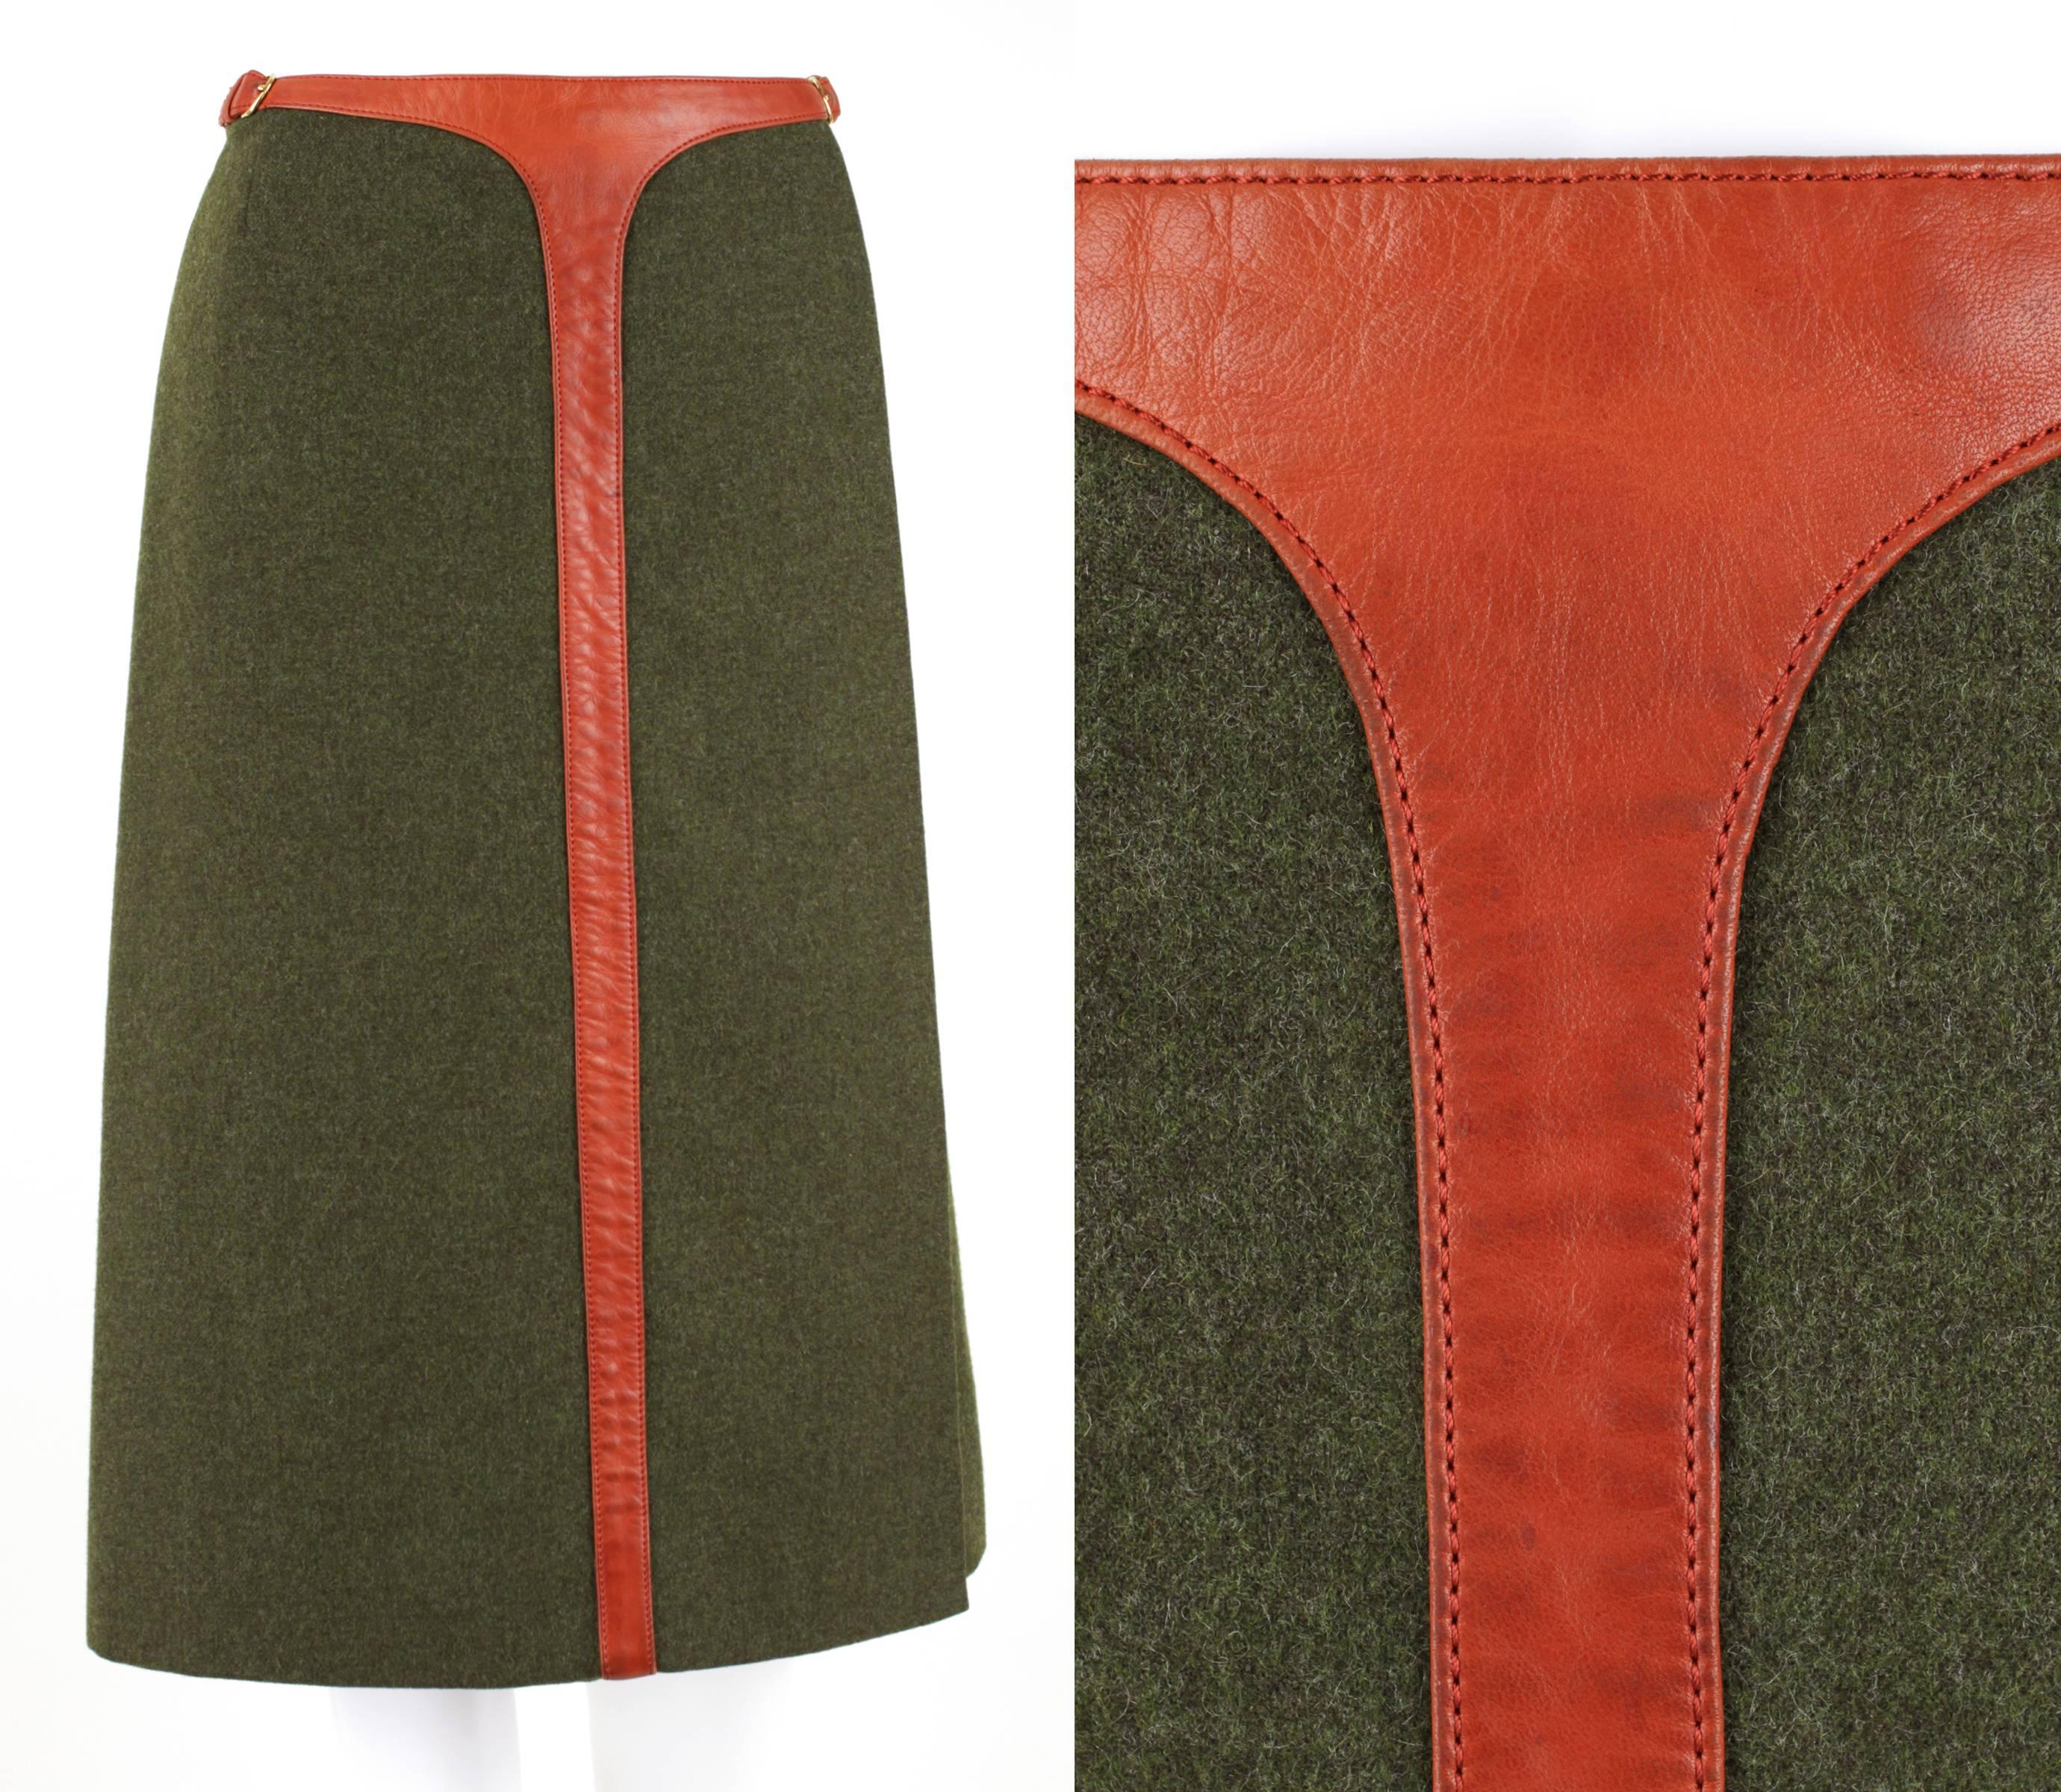 Vintage c.1970's Hermes Sport olive green wool wrap skirt. Orange-brown genuine lambskin trim around waist and down center of skirt. Wrap secures with buckle, snap and hook/eyes on left side waist. Knee length. Fully lined. Marked Fabric Content: